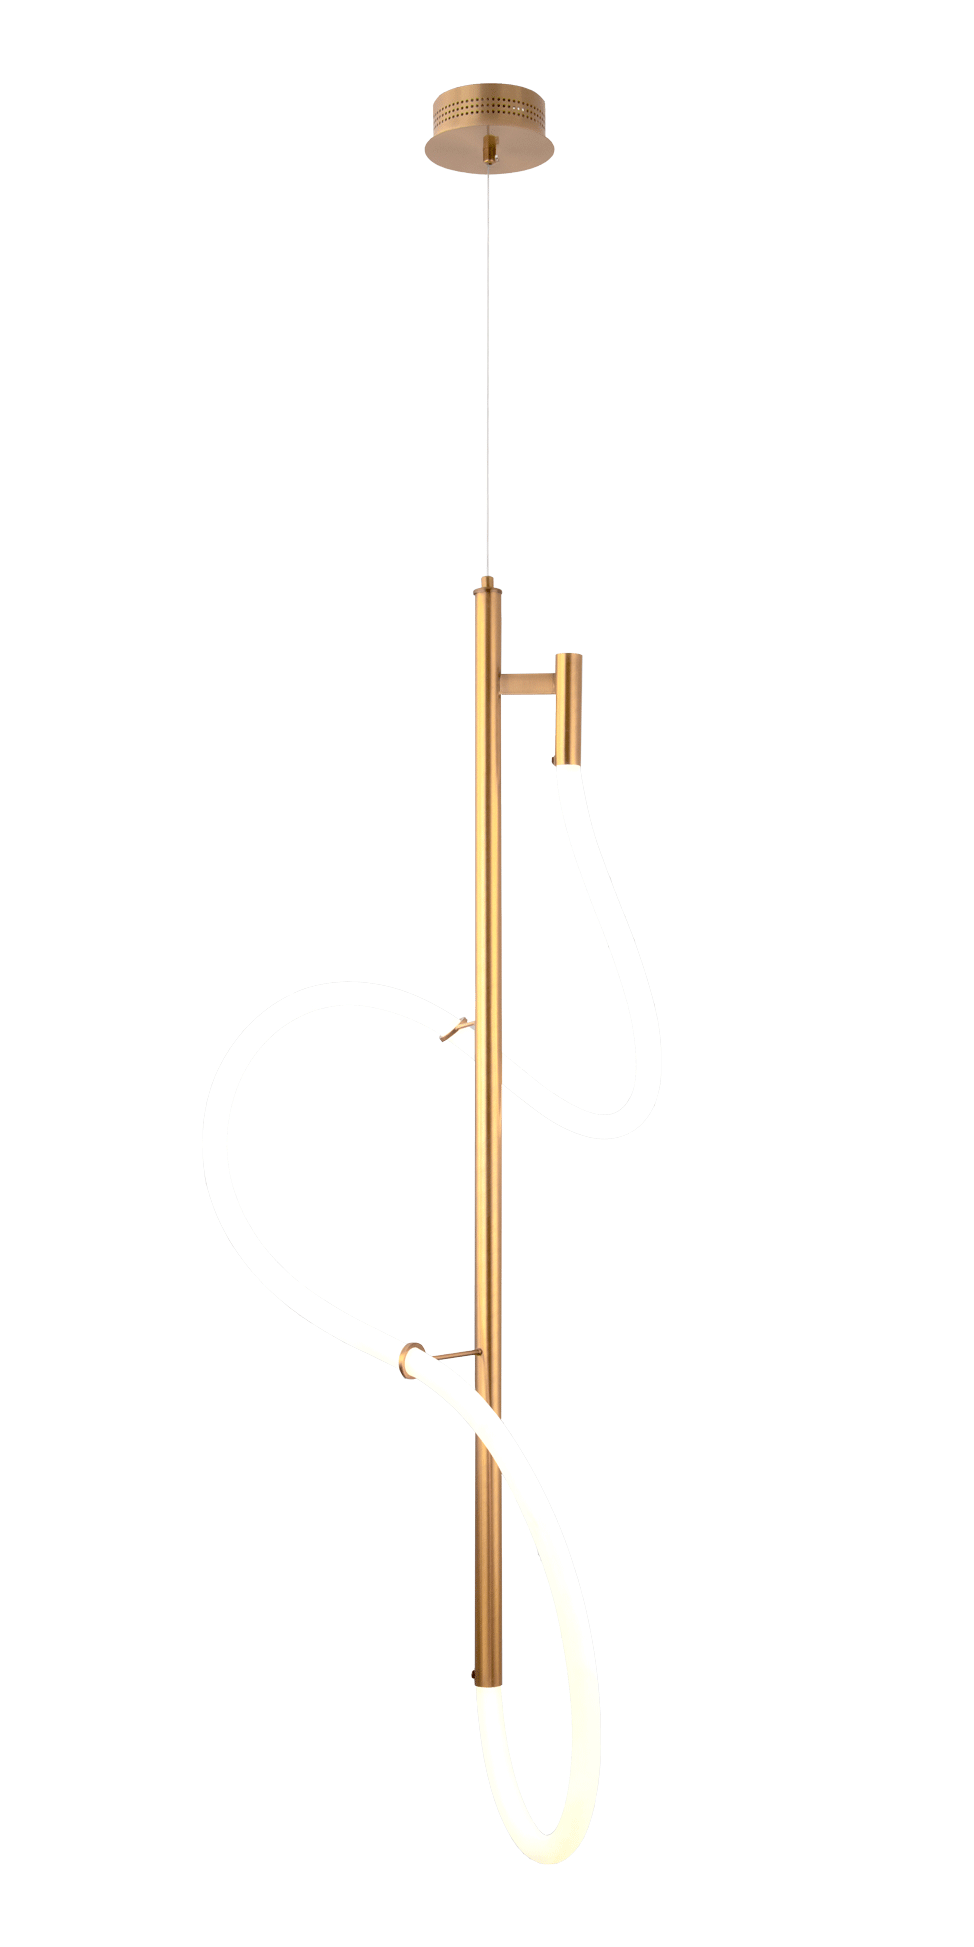 Люстра Nuolang KT874DW/40 BRASS